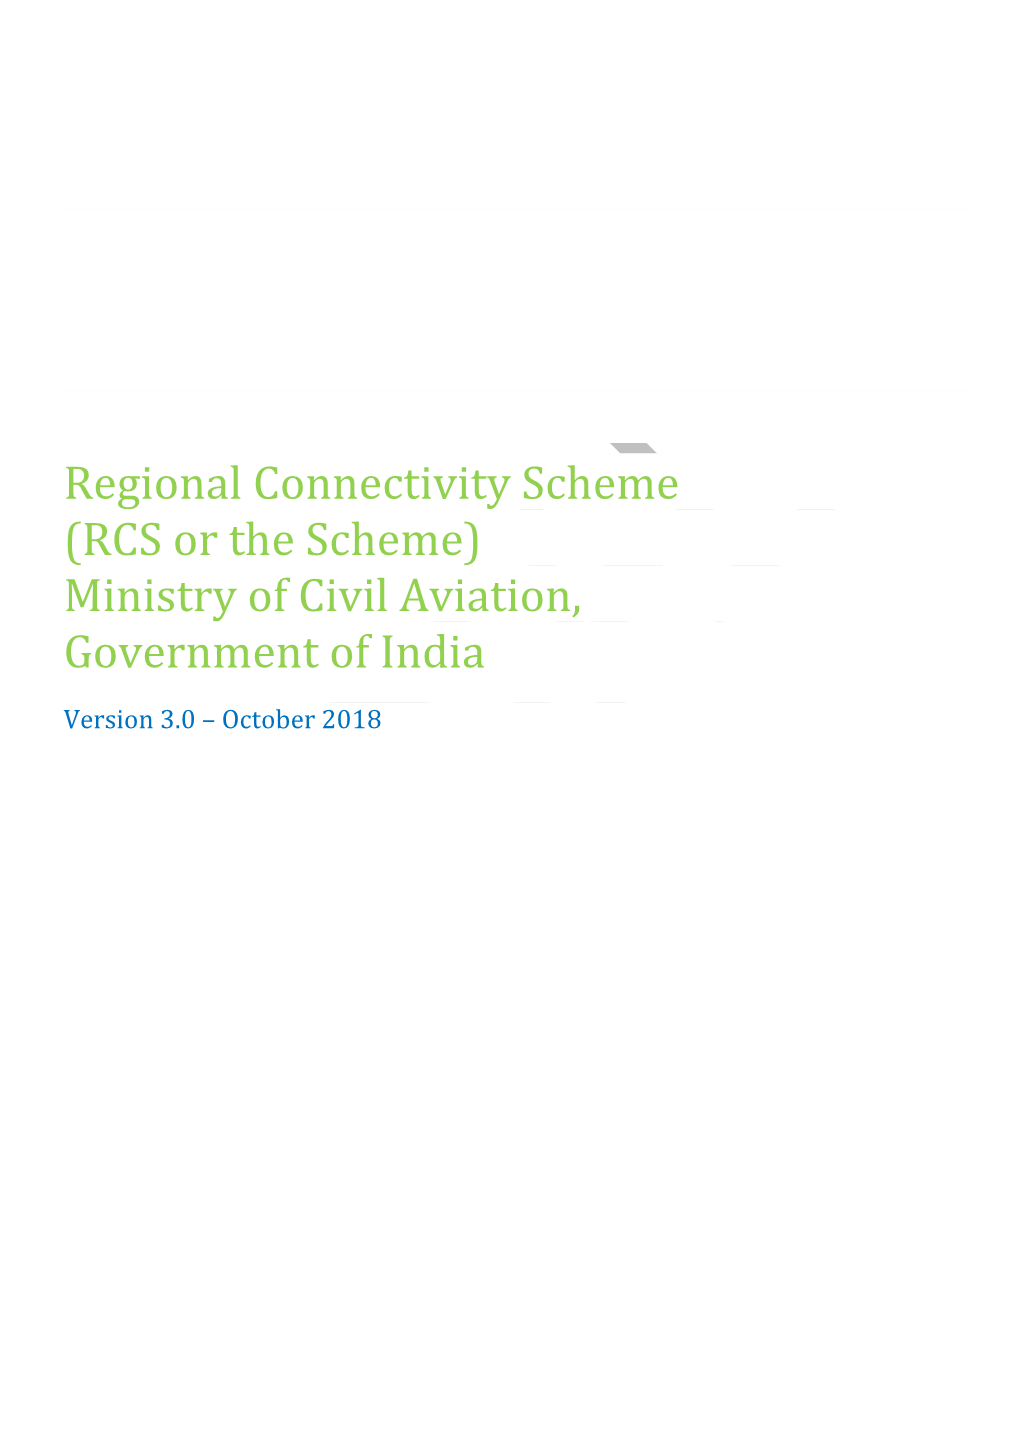 (RCS Or the Scheme) Ministry of Civil Aviation, Government of India